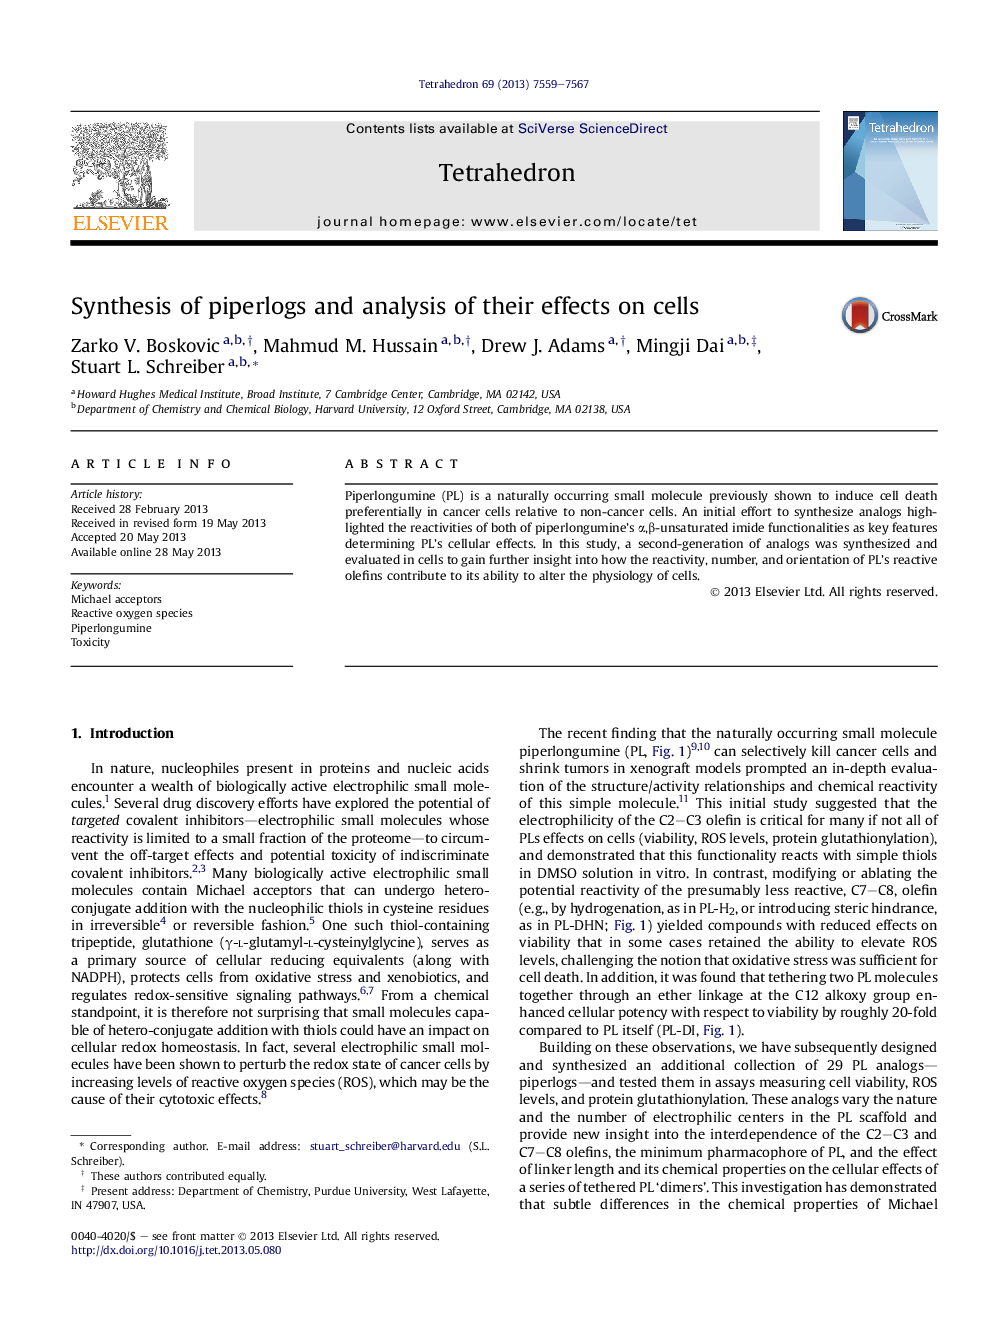 Synthesis of piperlogs and analysis of their effects on cells